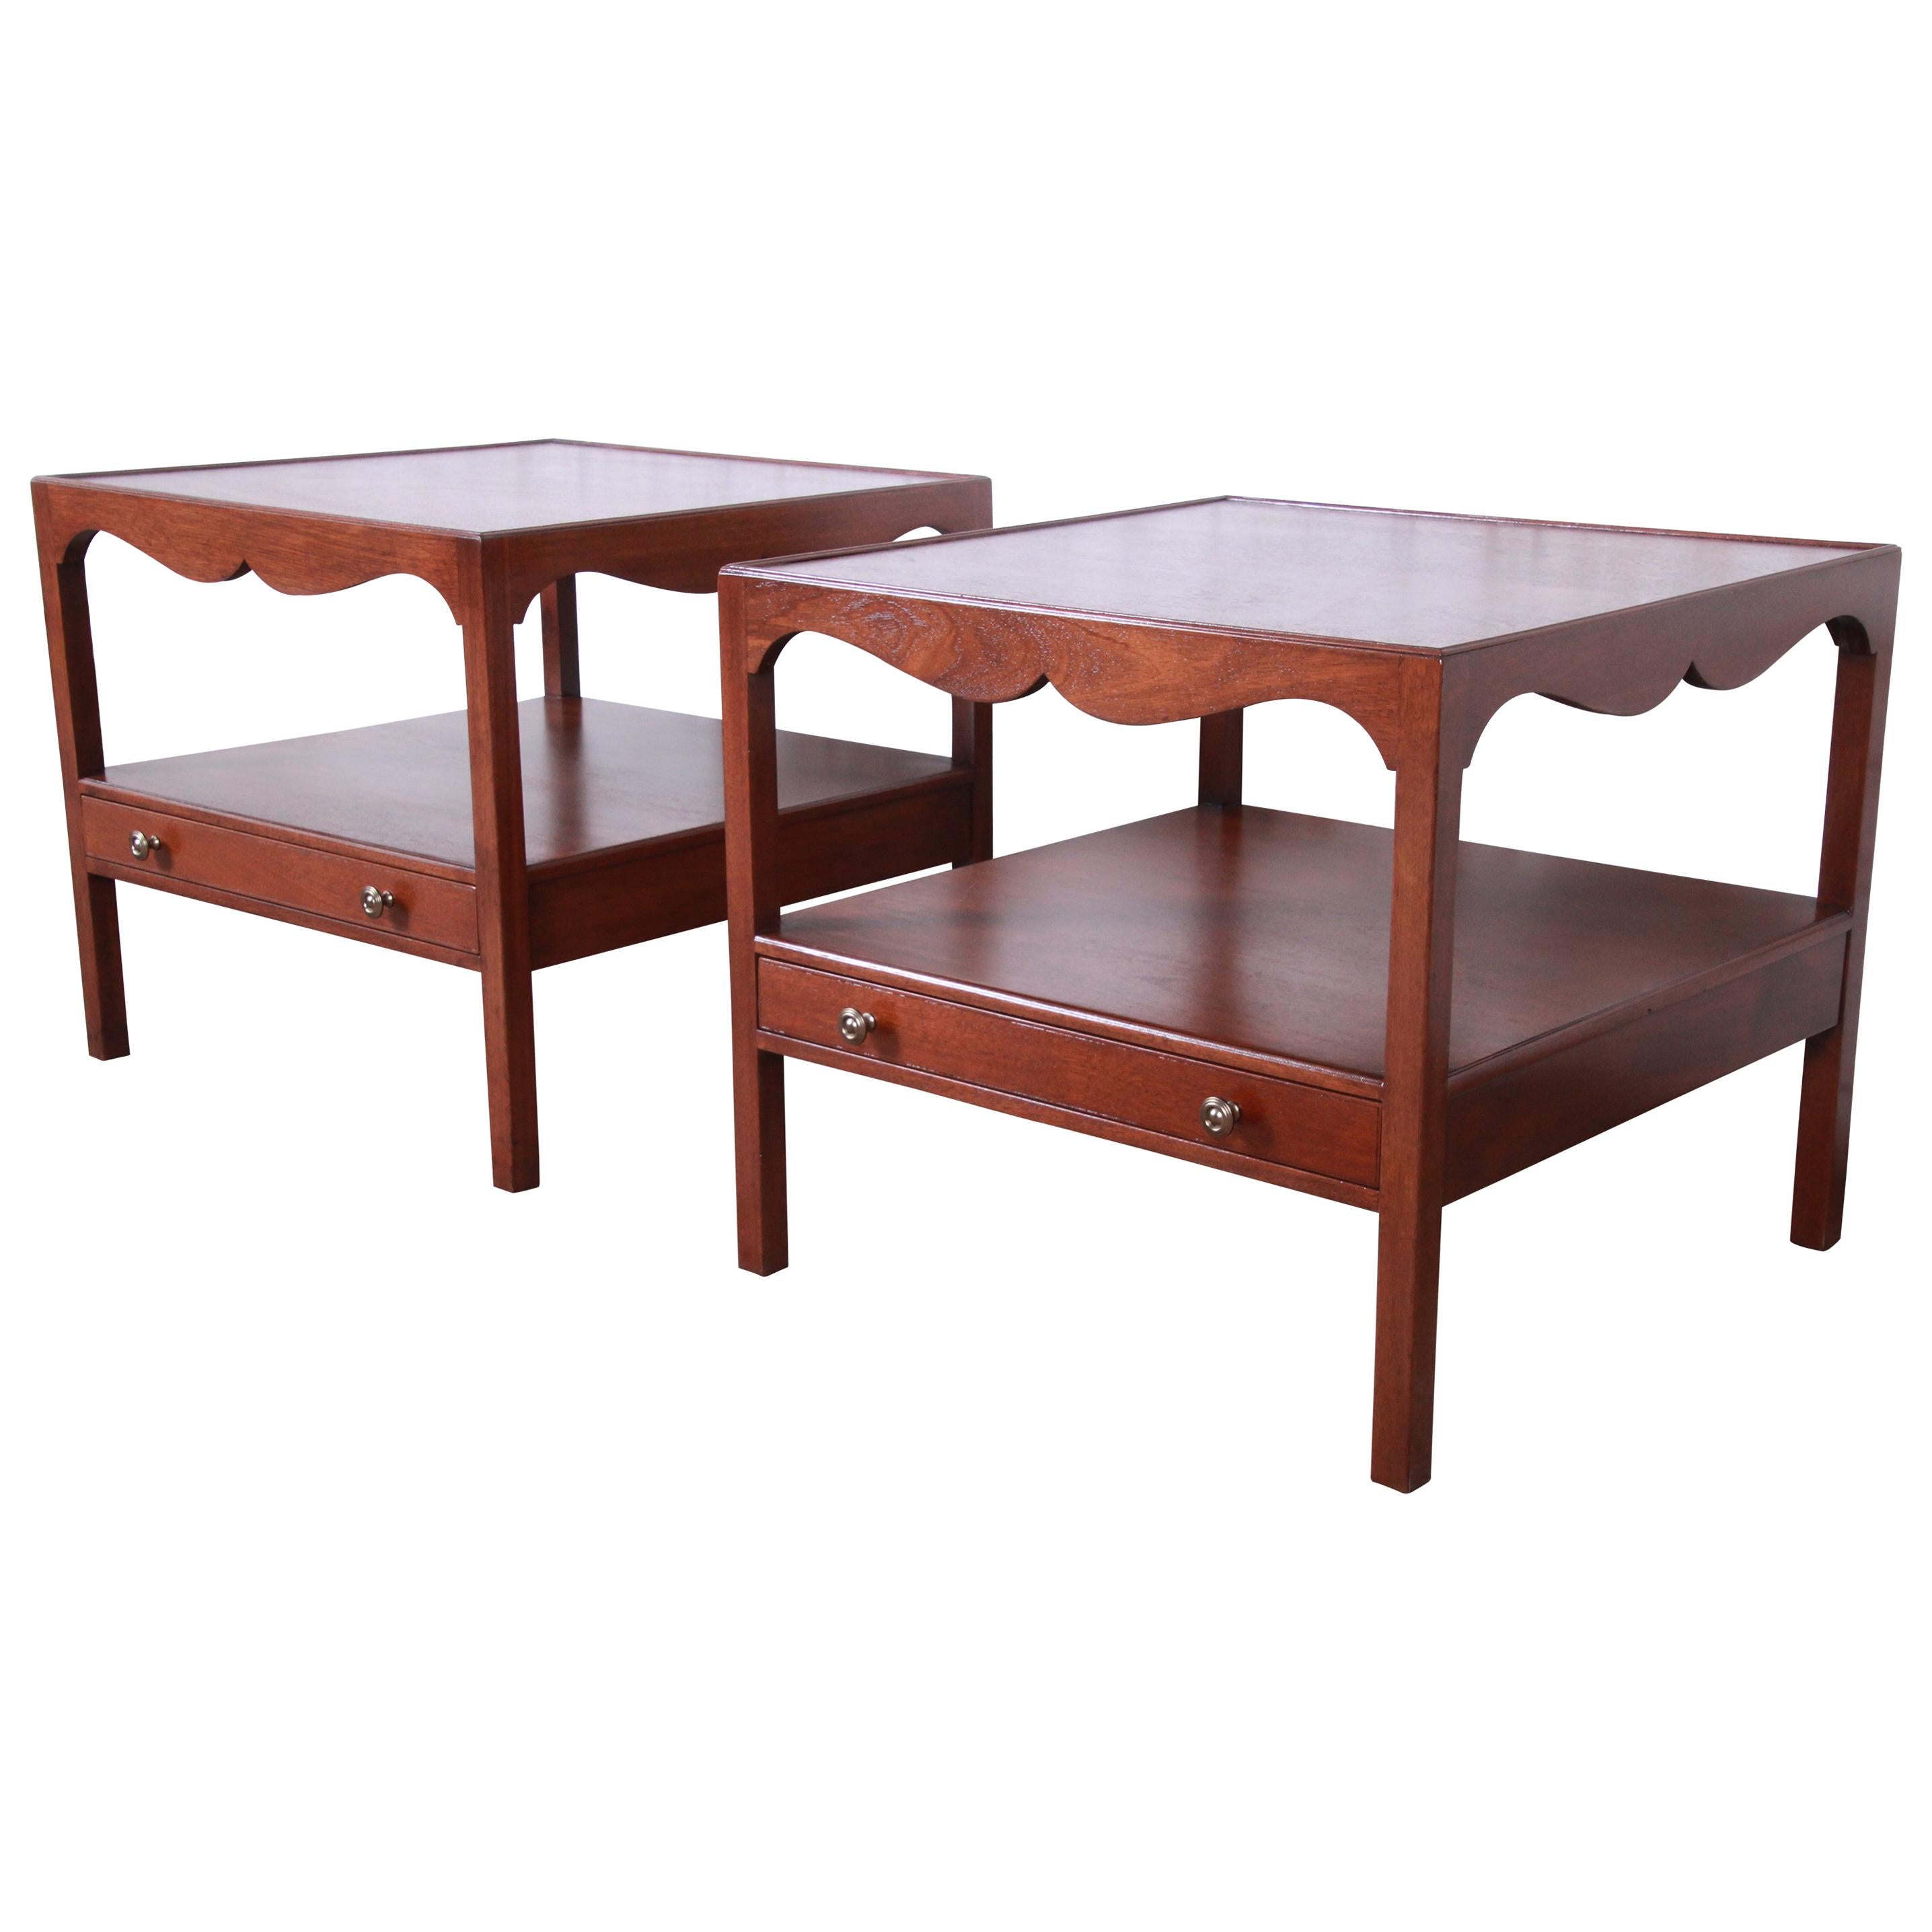 Kittinger American Colonial Walnut End Tables or Nightstands, Newly Restored